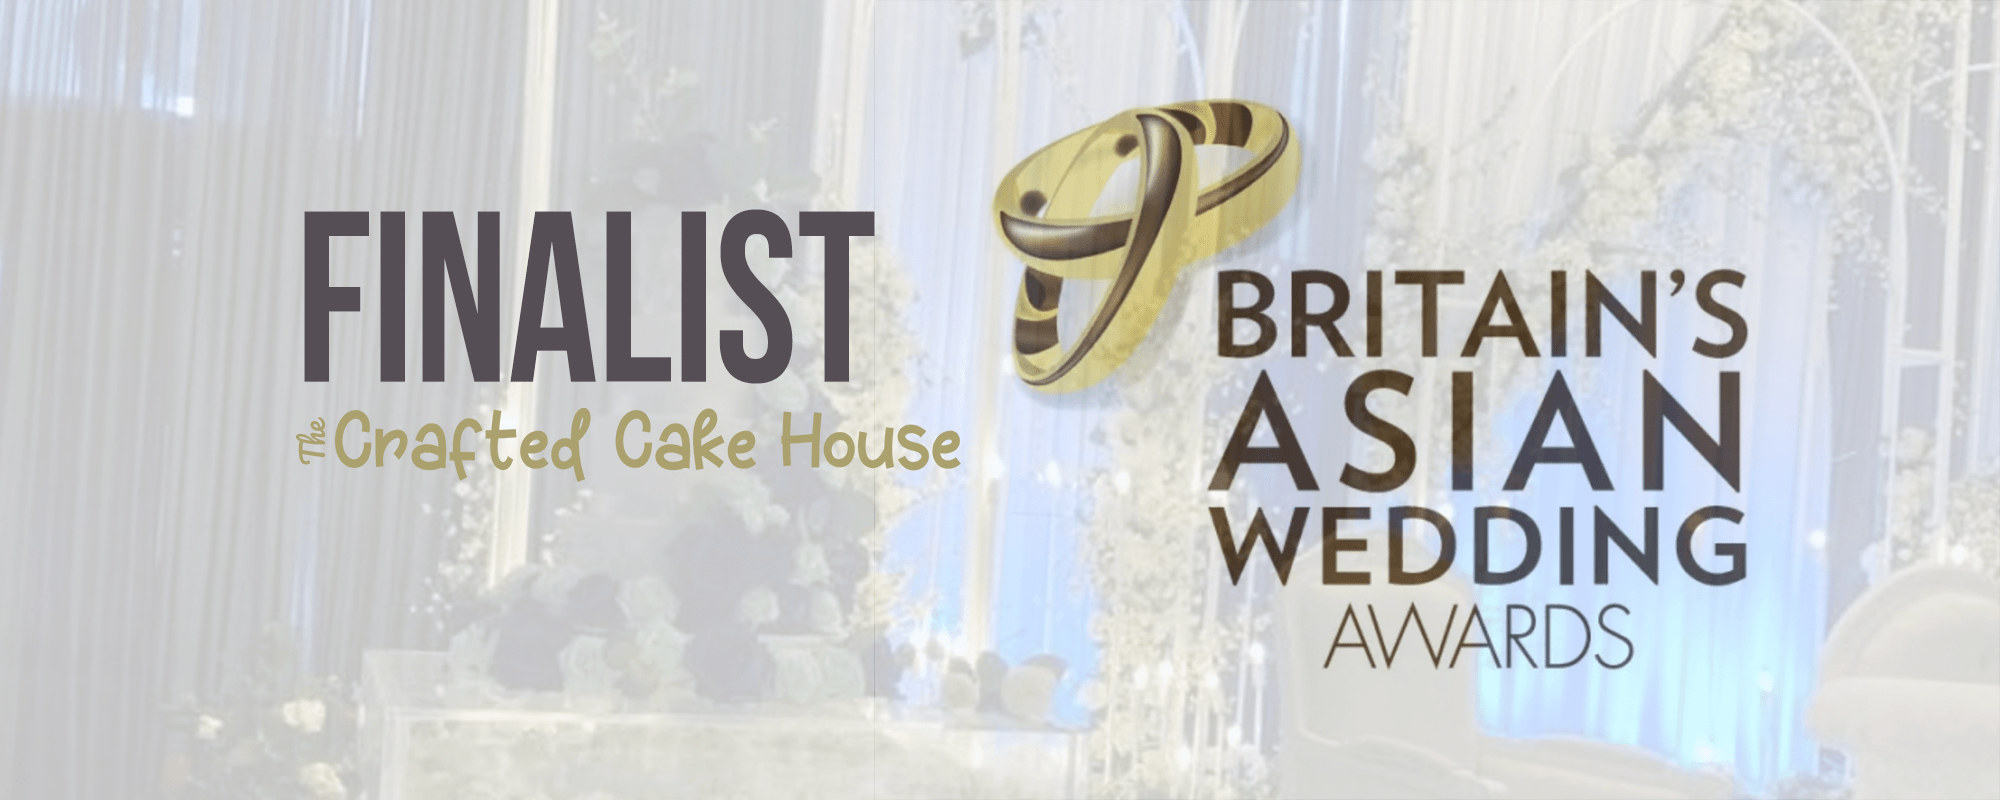 Finalists in Britain's Asian Wedding Awards 2022 - The Crafted Cake House - Best Cake Decorators